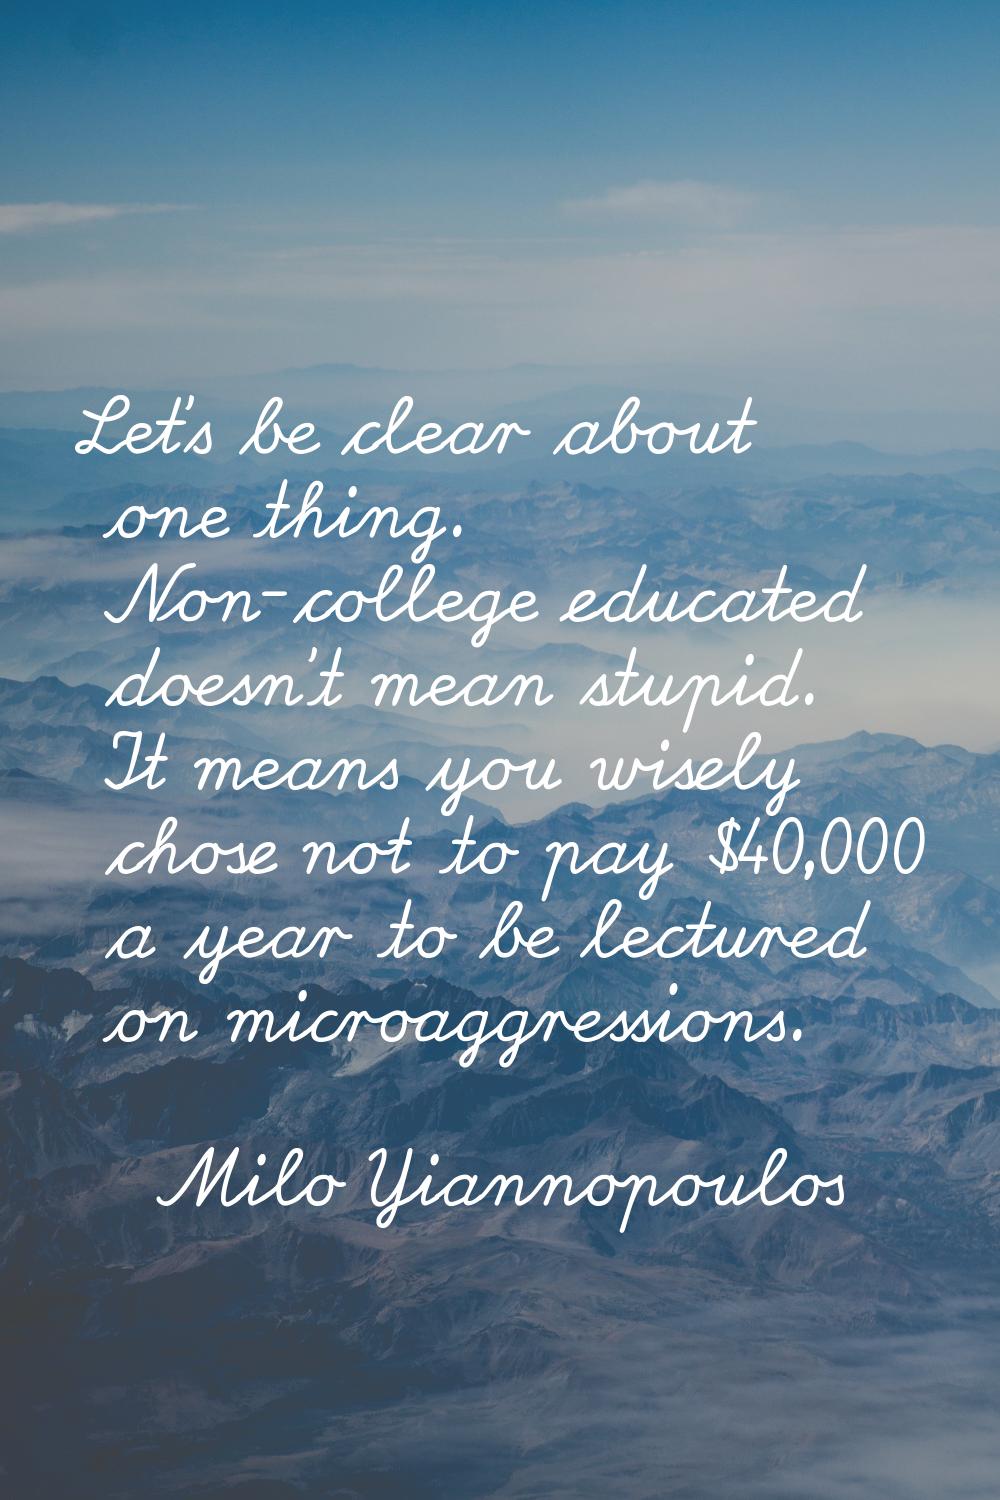 Let's be clear about one thing. Non-college educated doesn't mean stupid. It means you wisely chose